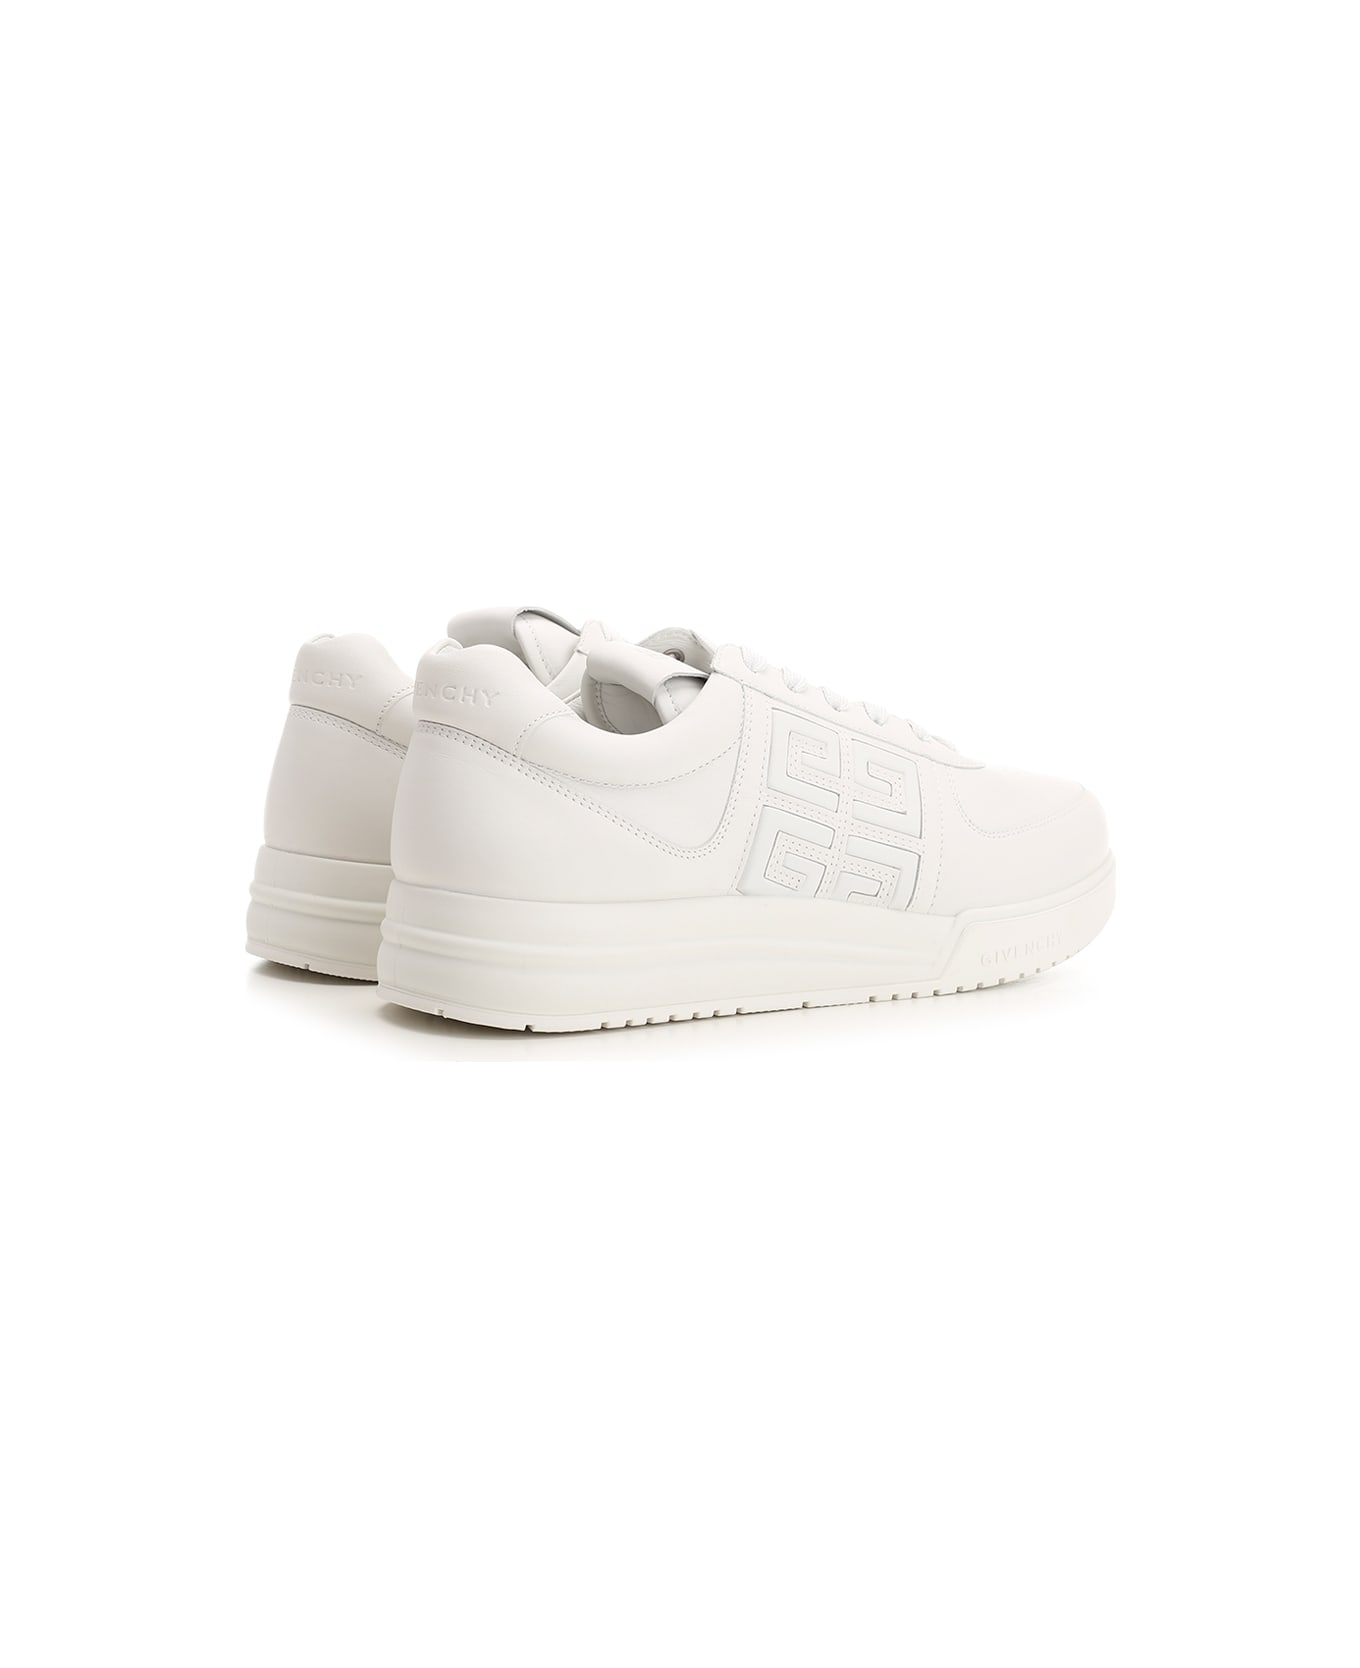 Givenchy 'g4' Low Sneaker - White